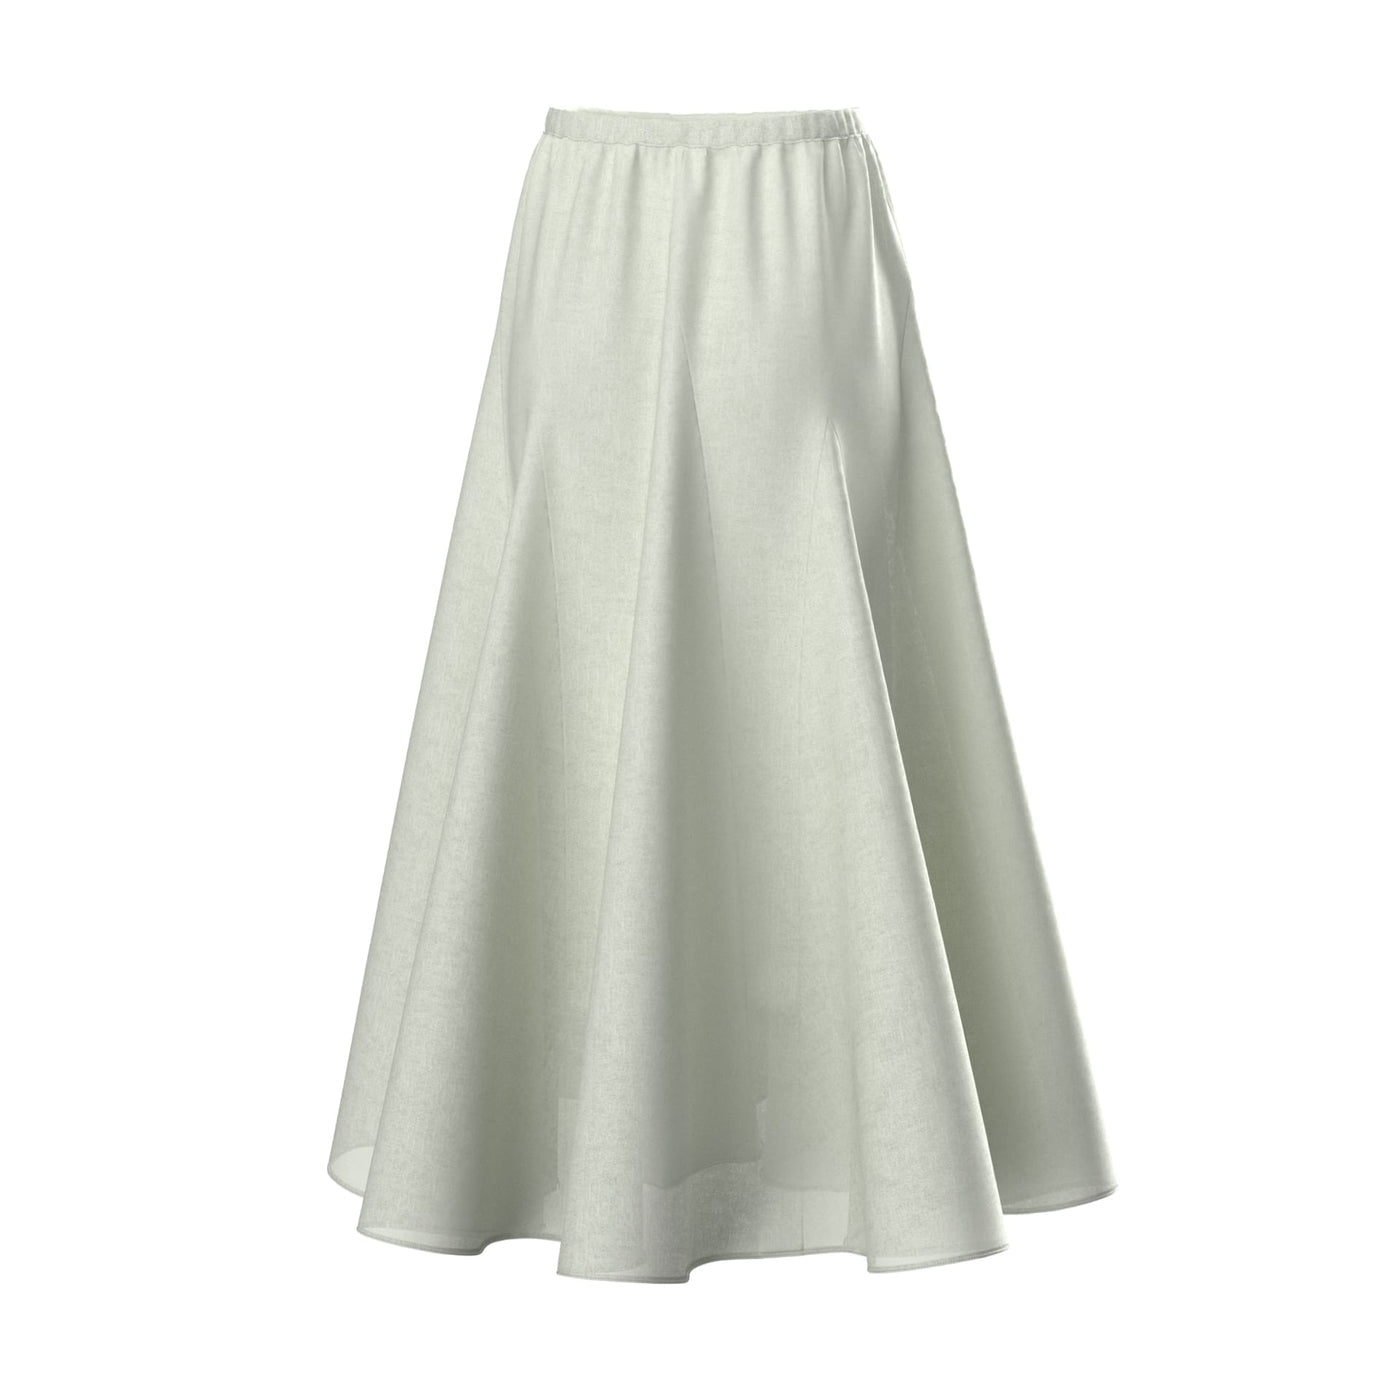 Lilly Pilly Collection 100% organic linen Stella Skirt in Tea, shown as a 3D model back view